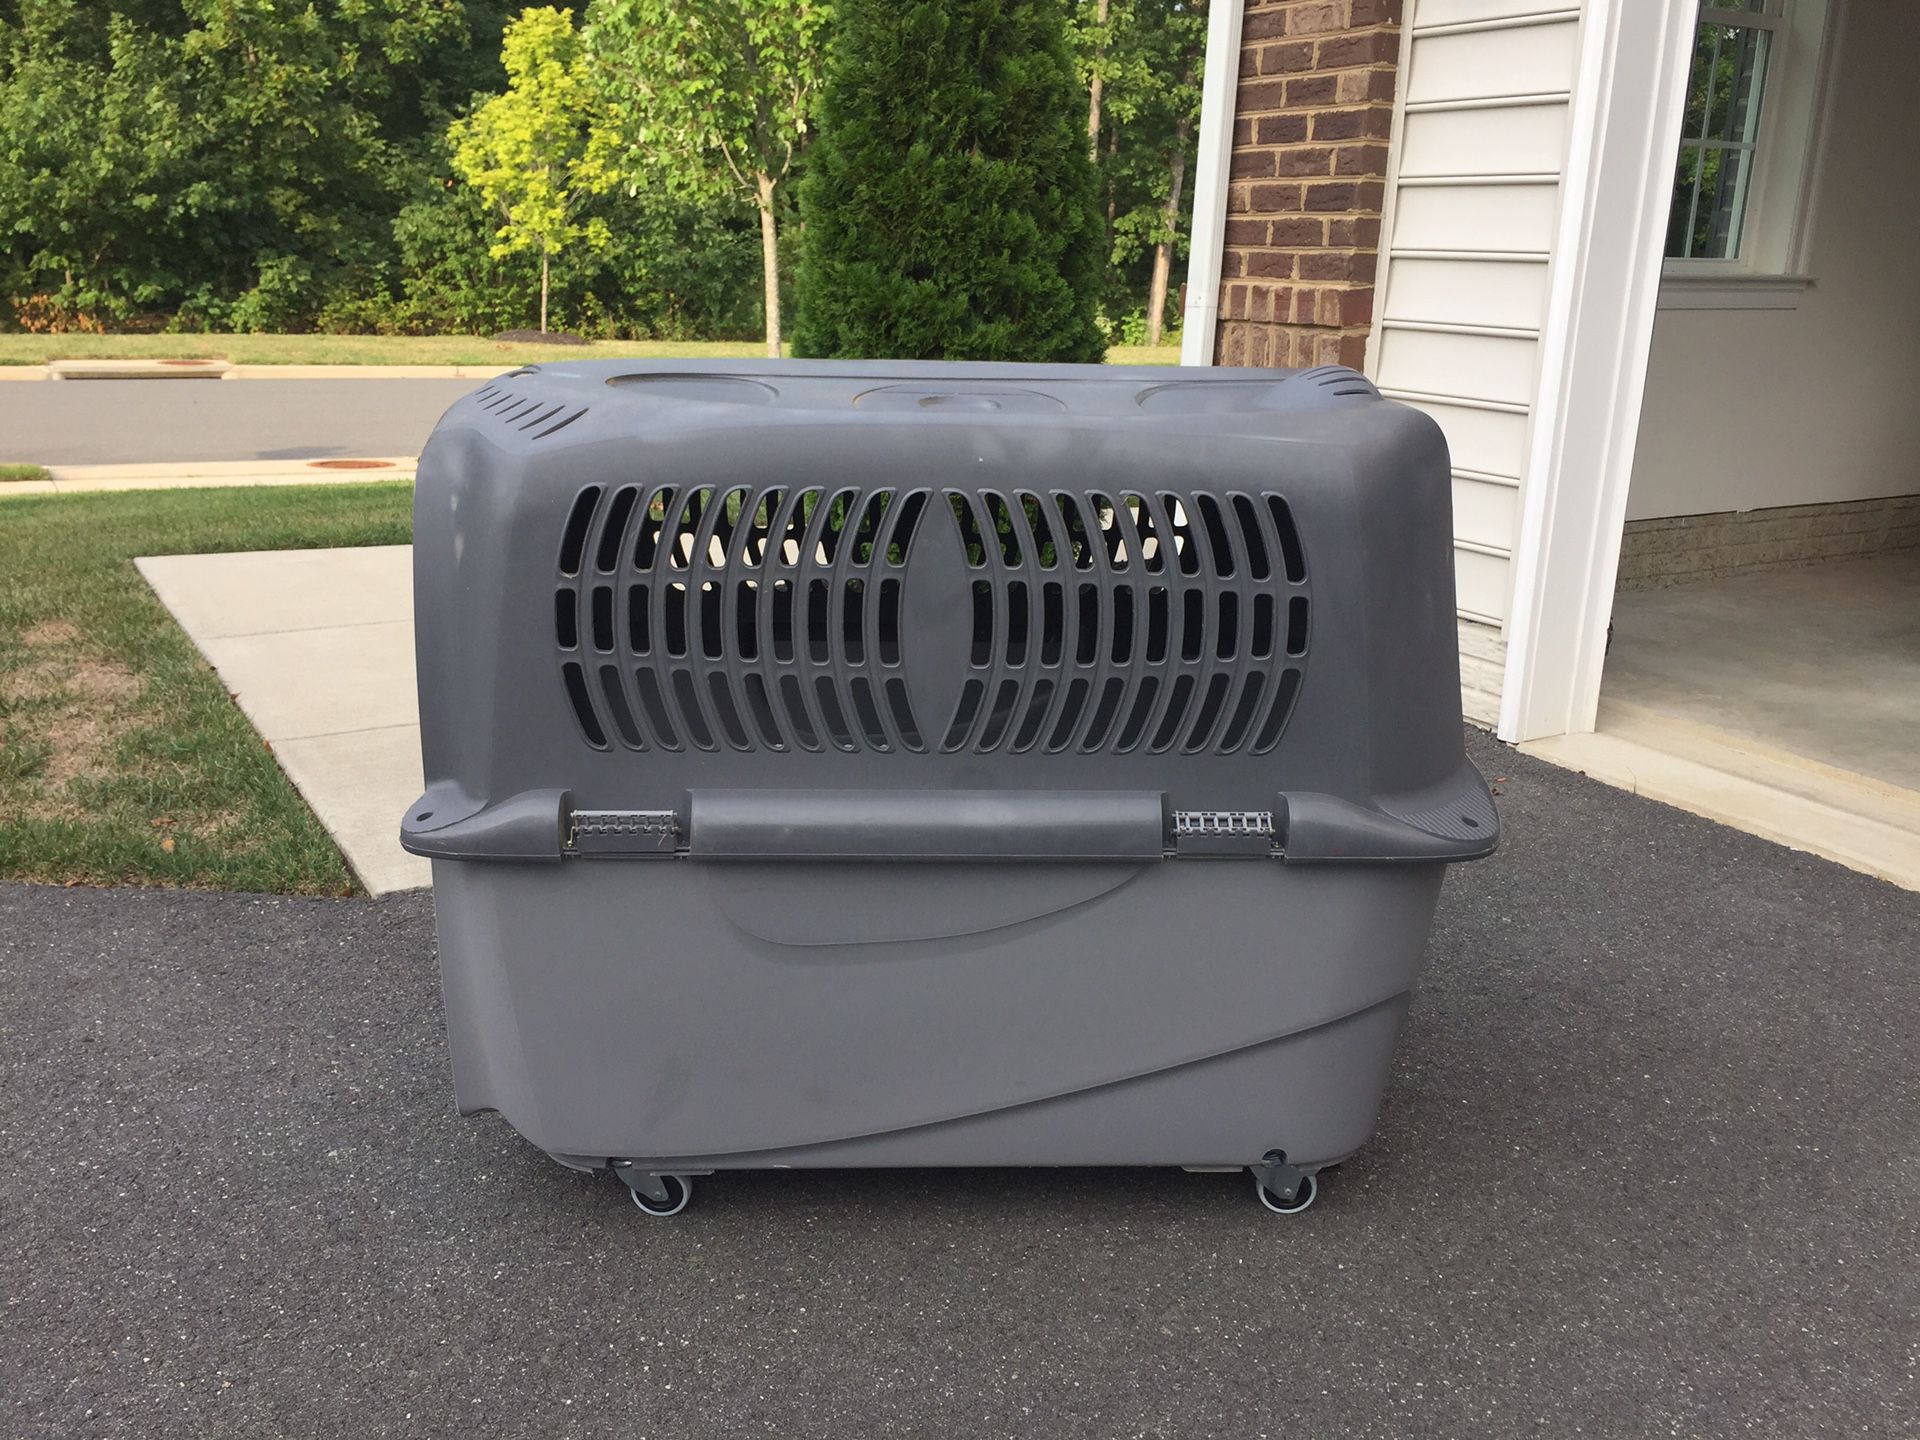 Dog plastic cage, kennel, 3XL for travel with wheels